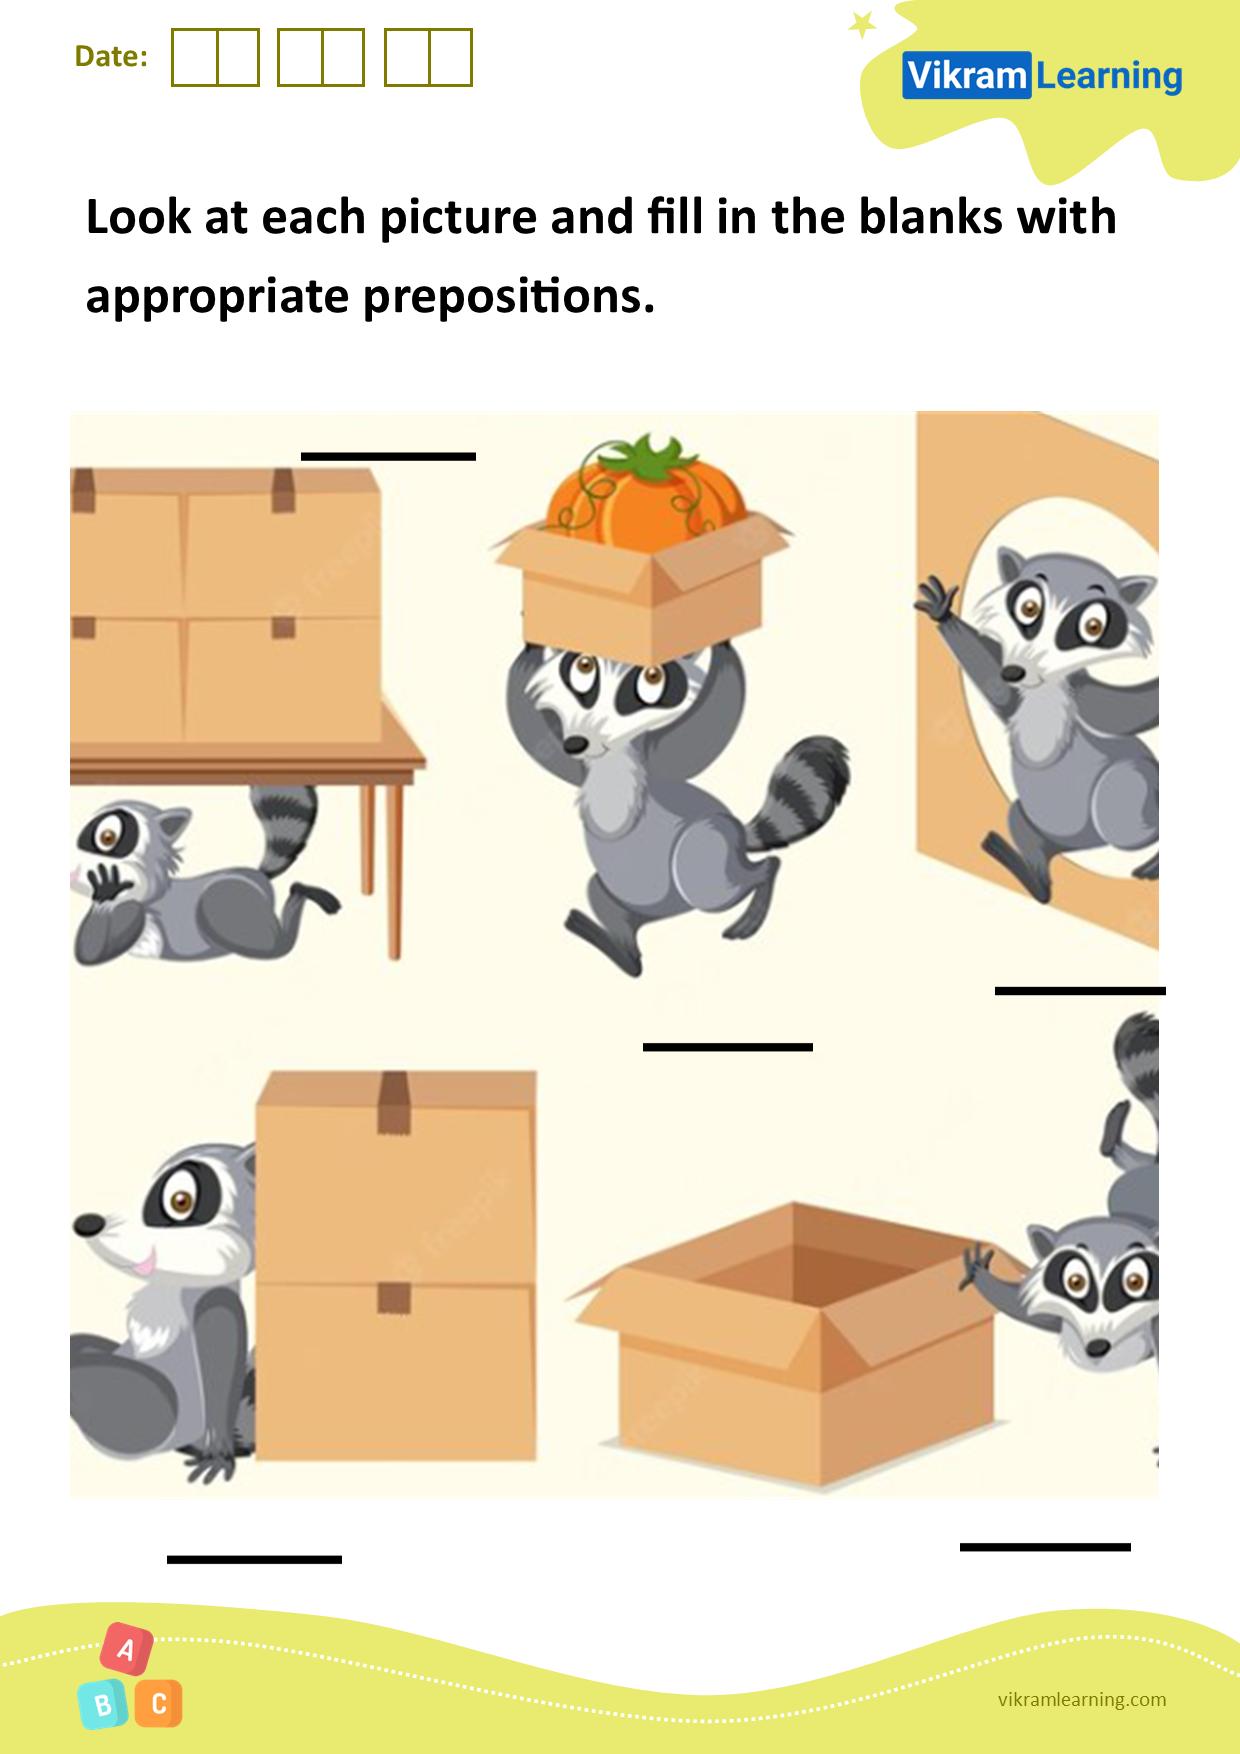 download-look-at-each-picture-and-fill-in-the-blanks-with-appropriate-prepositions-worksheets